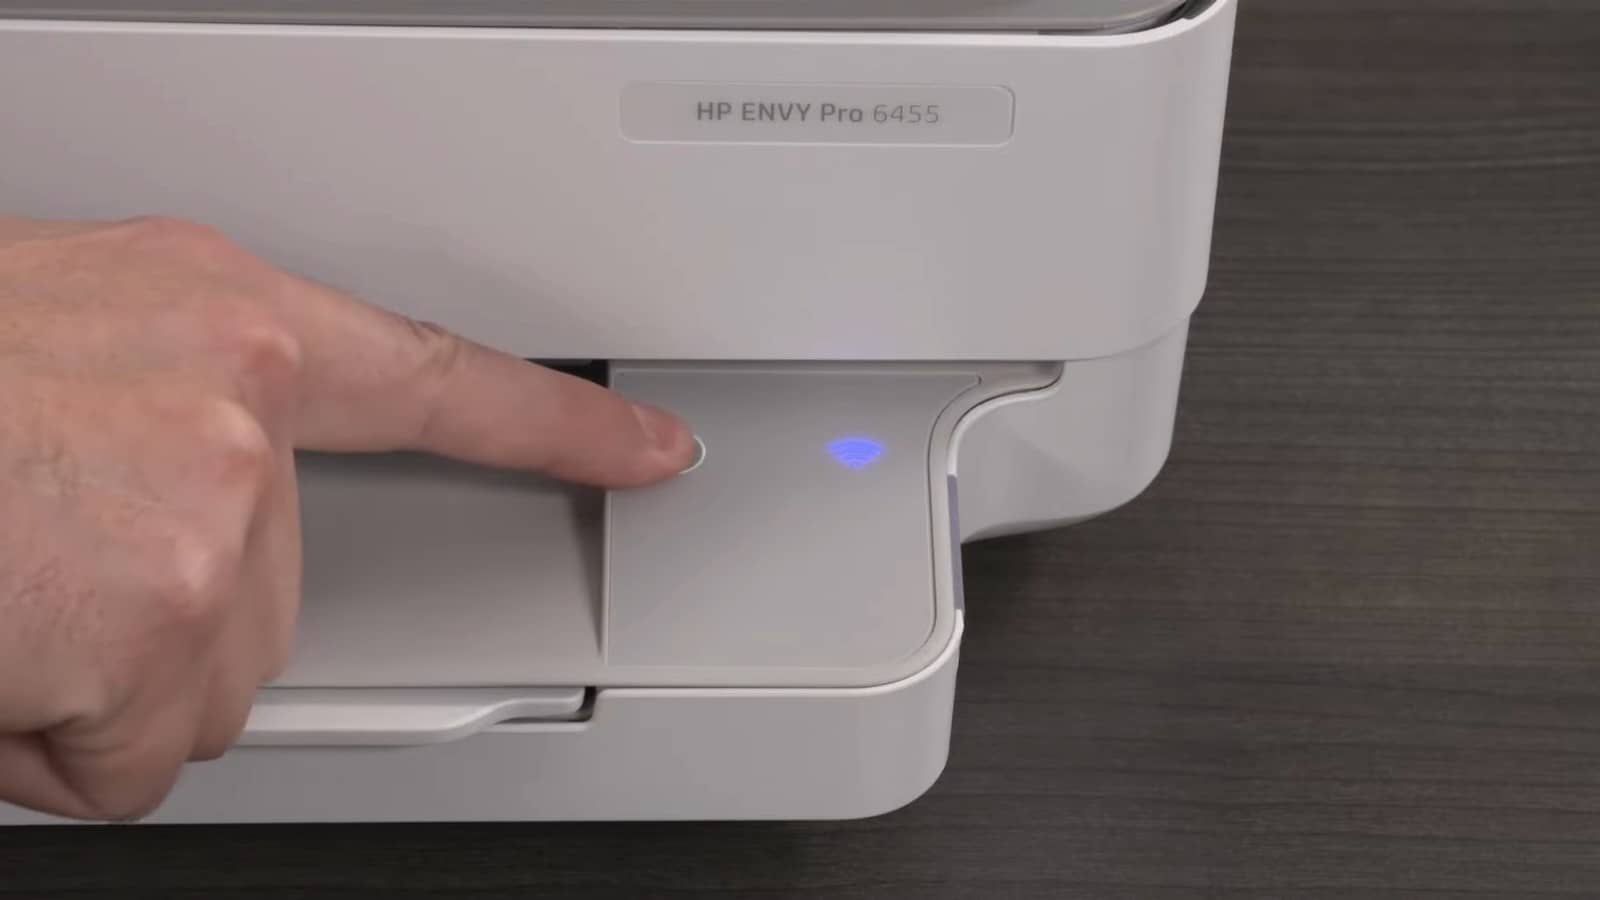 HP printer setup and configuring wireless connection